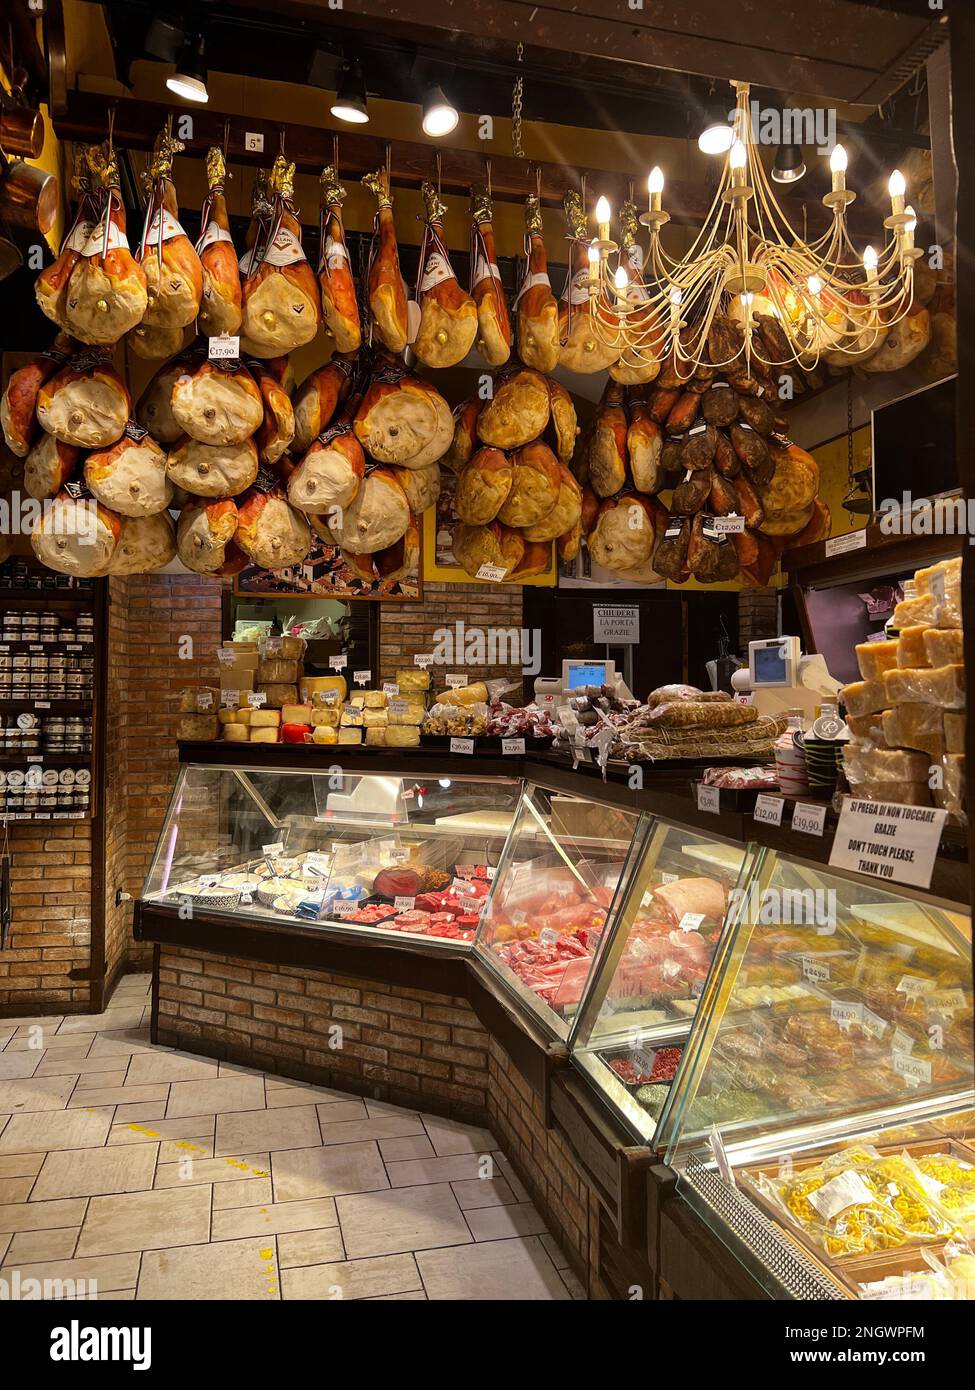 A charming, neighborhood shop in the old market of Quadrilatero, Bologna Italy offering traditional cured meats, cheeses, and olive oil. Stock Photo